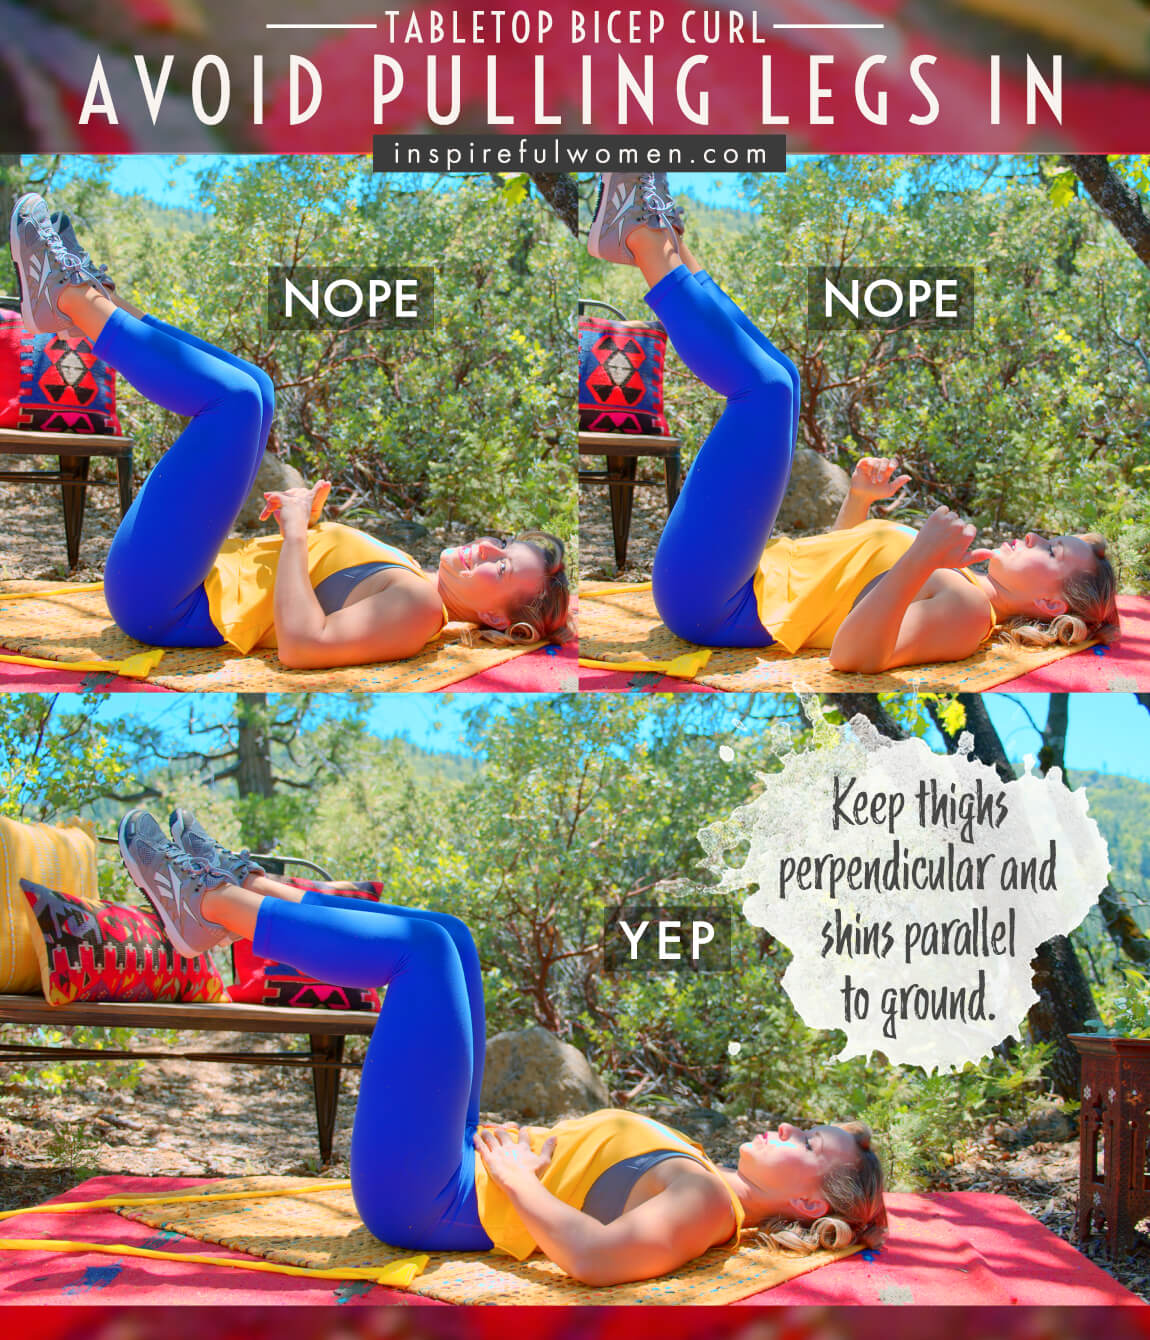 avoid-pulling-legs-in-tabletop-supine-banded-bicep-curls-feet-anchor-exercise-proper-form